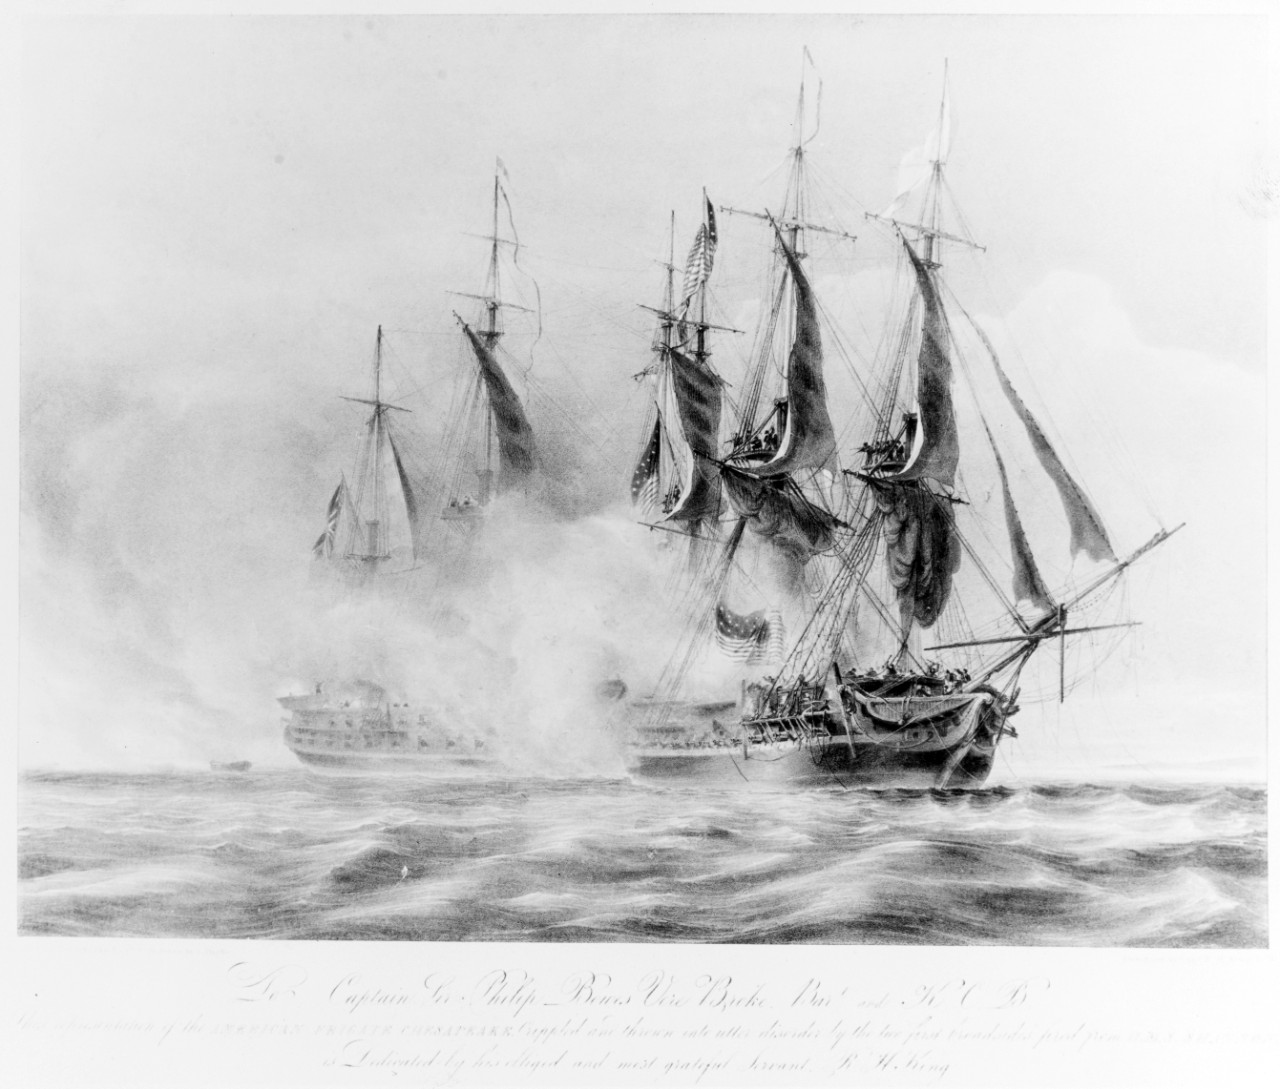 Photo #: NH 63179-KN Action between USS Chesapeake and HMS Shannon, 1 June 1813